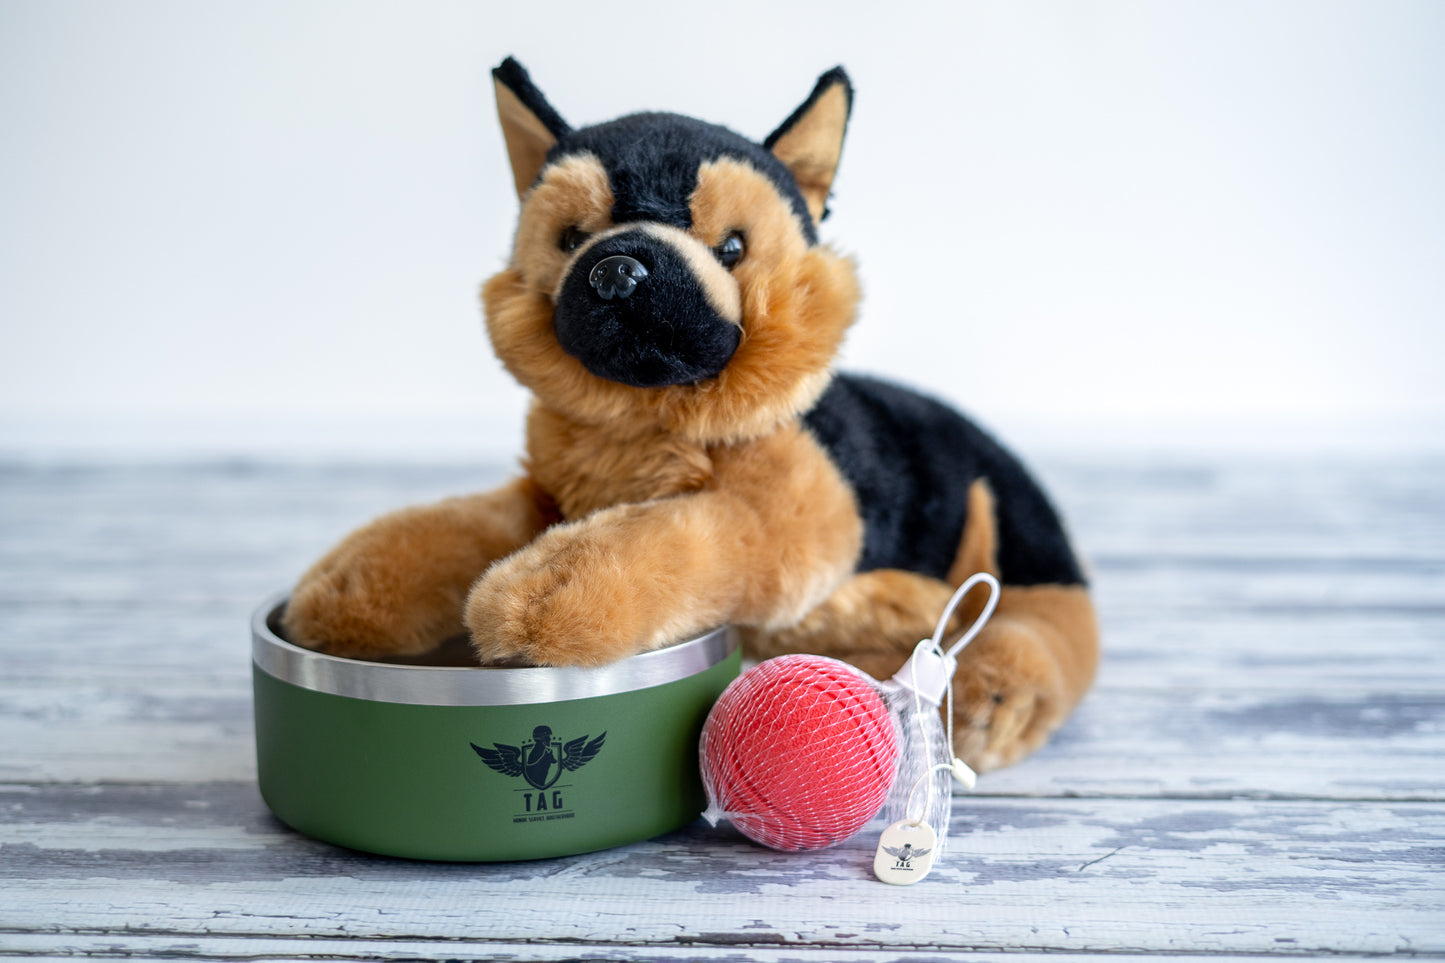 32 OZ INSULATED WATER BOWL & BITE RESISTANT FETCH BALL!!!